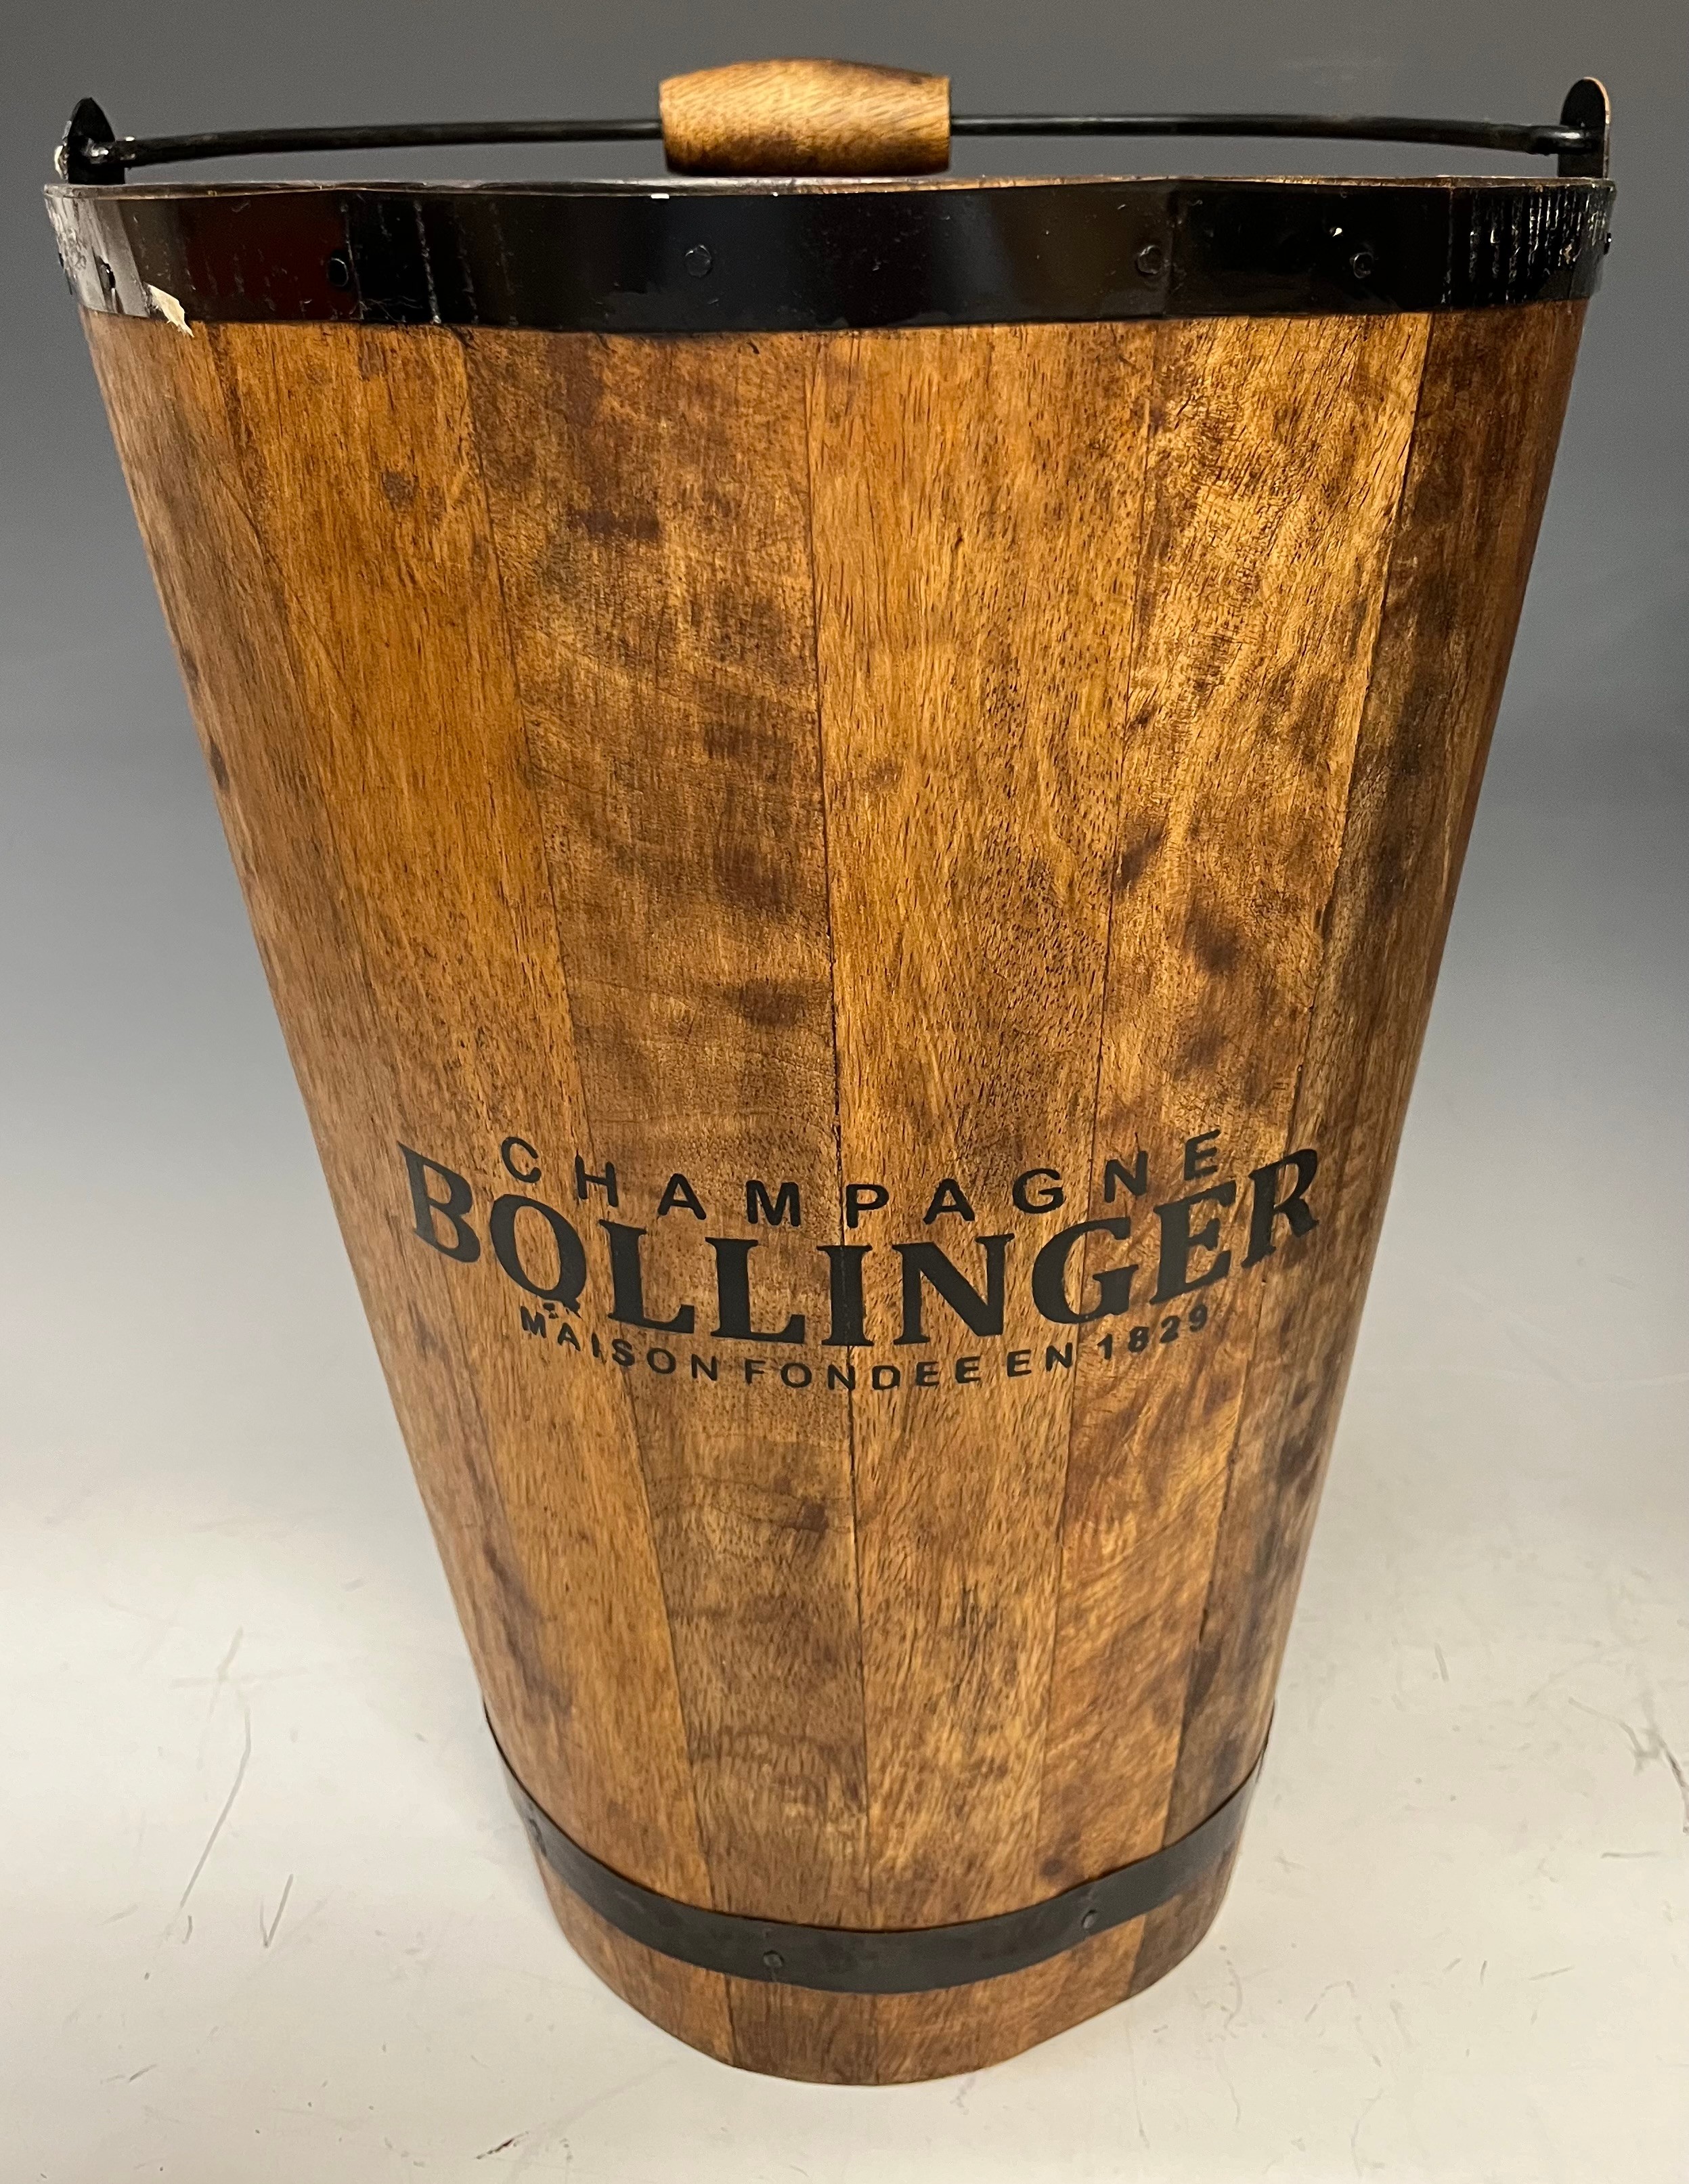 A pair of tall wooden wine buckets, marked 'Champagne Bollinger, Maison Fondée en 1829', 40cm high - Image 2 of 3